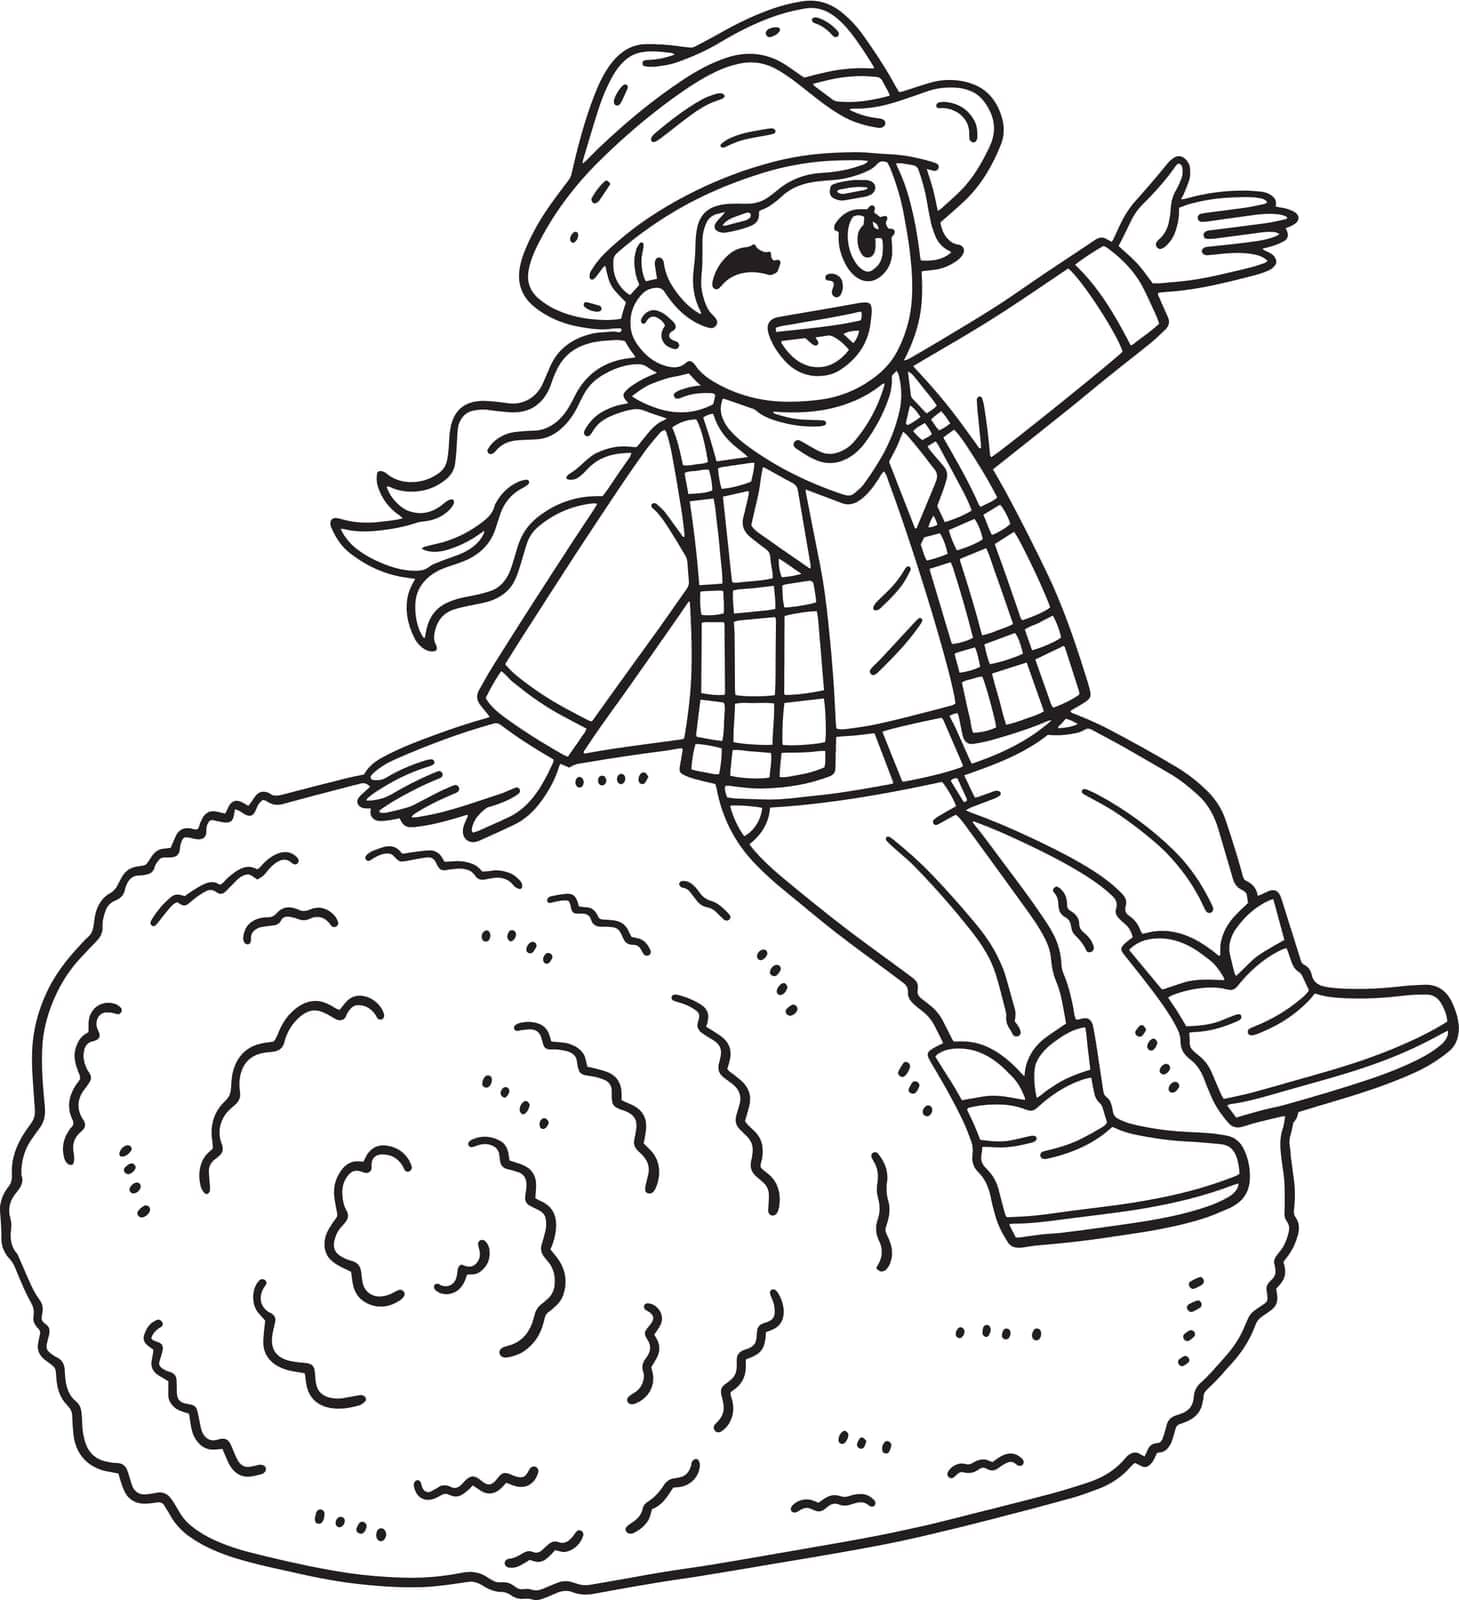 A cute and funny coloring page of a Cowgirl Sitting on Hay Bale. Provides hours of coloring fun for children. To color, this page is very easy. Suitable for little kids and toddlers.